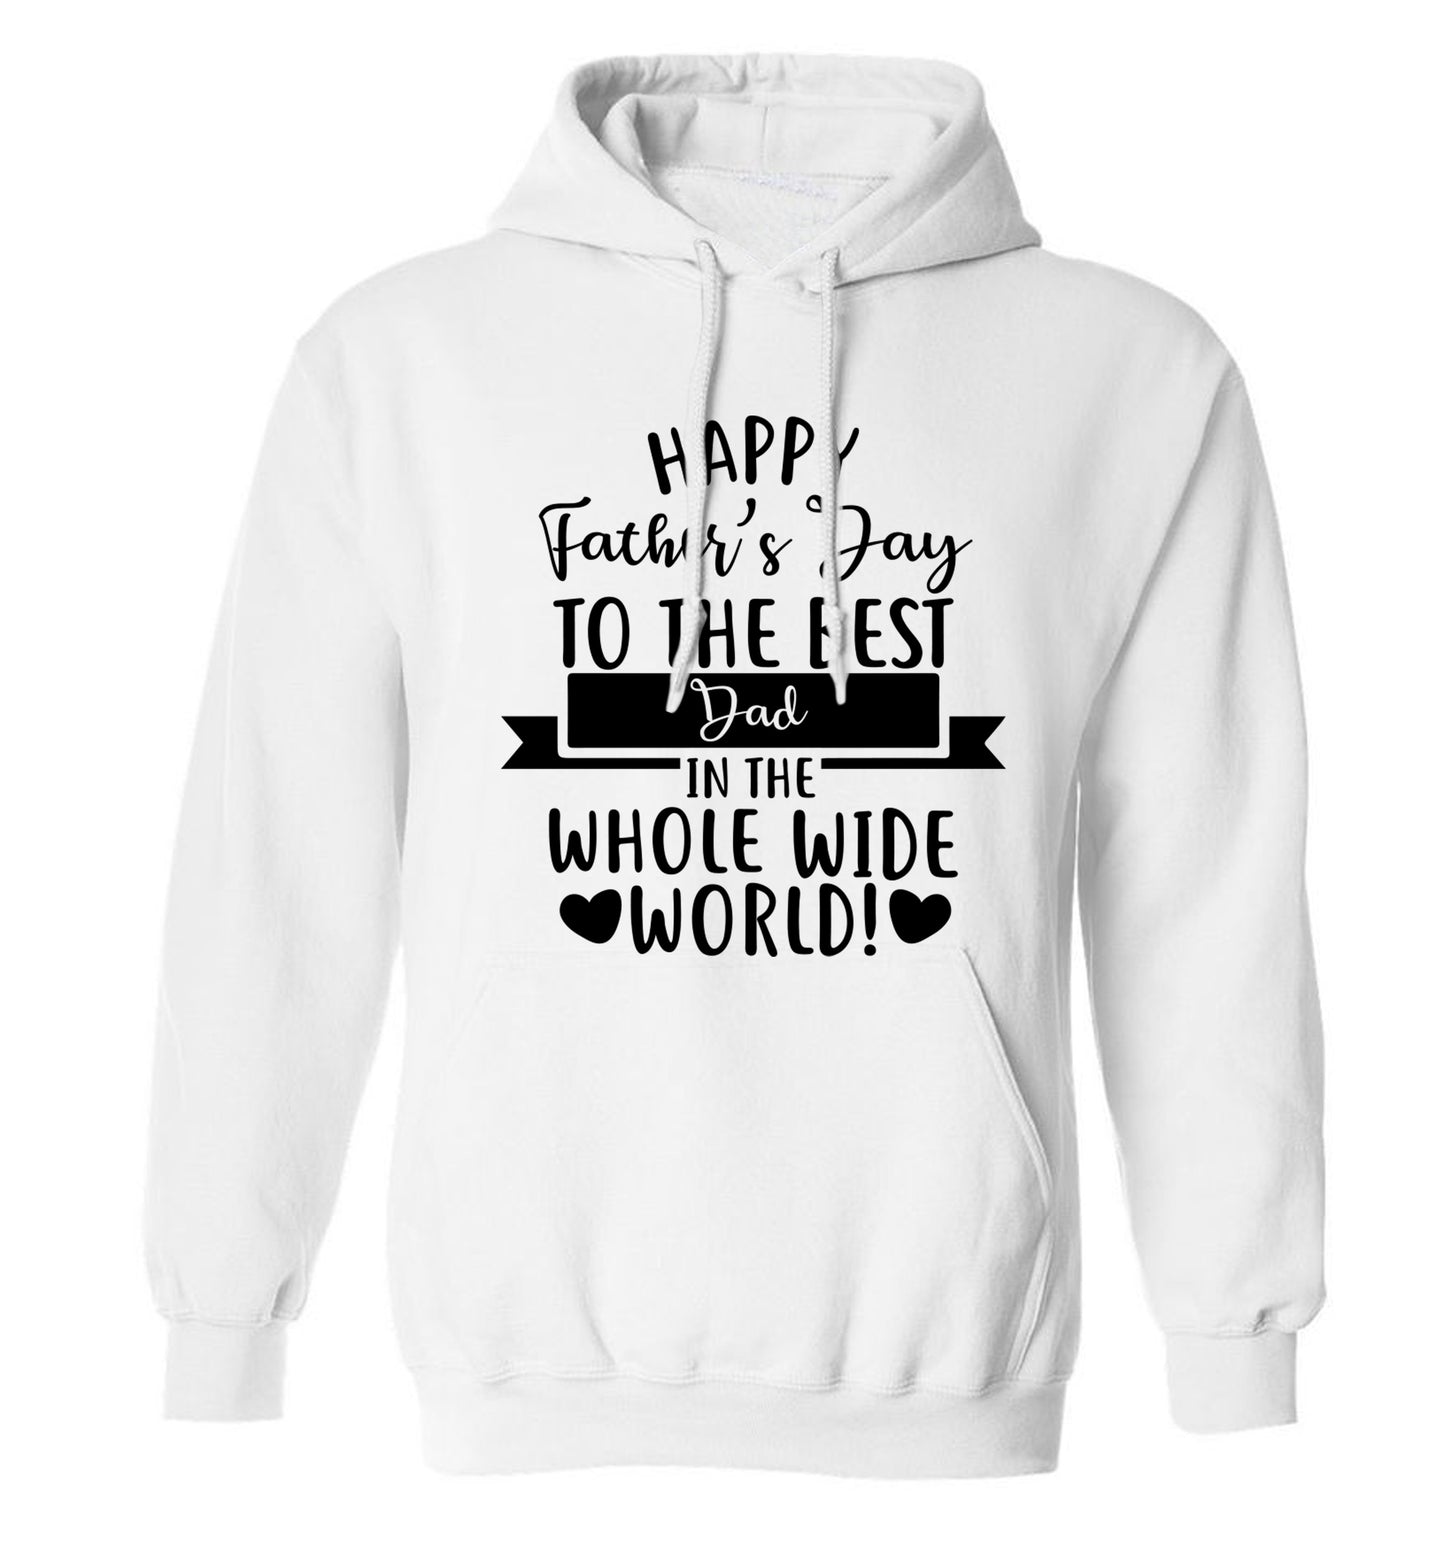 Happy Father's Day to the best father in the world! adults unisex white hoodie 2XL